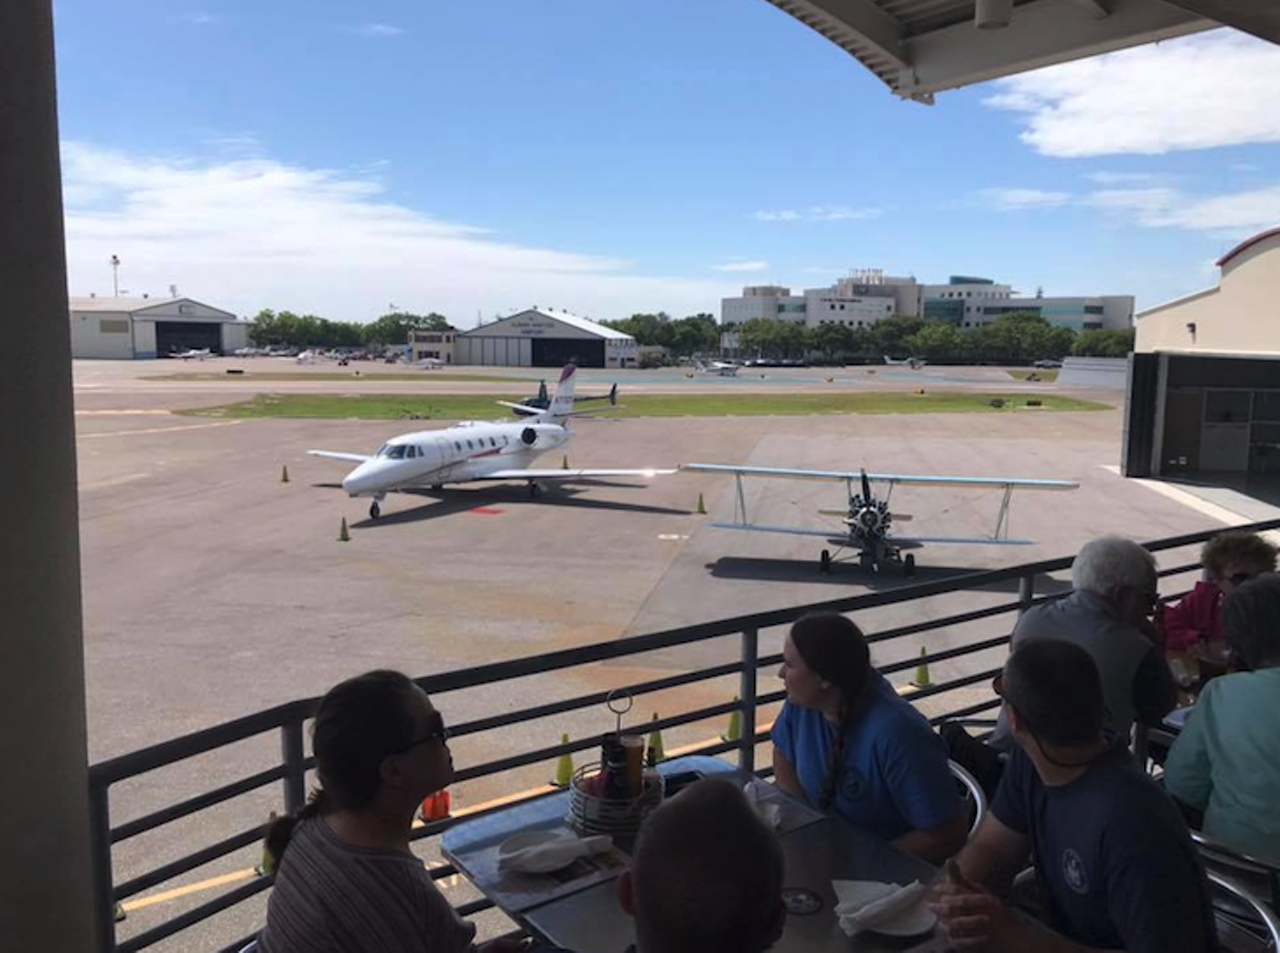 The Hangar Restaurant & Flight Lounge  
Albert Whitted Airport, 540 1st St S., St. Pete, 727-823-7767
More so off the beaten path, more people need to take advantage of the Hangar&#146;s location, and being able to get some breakfast bites while watching planes take off.
Photo via  The Hangar/ Facebook